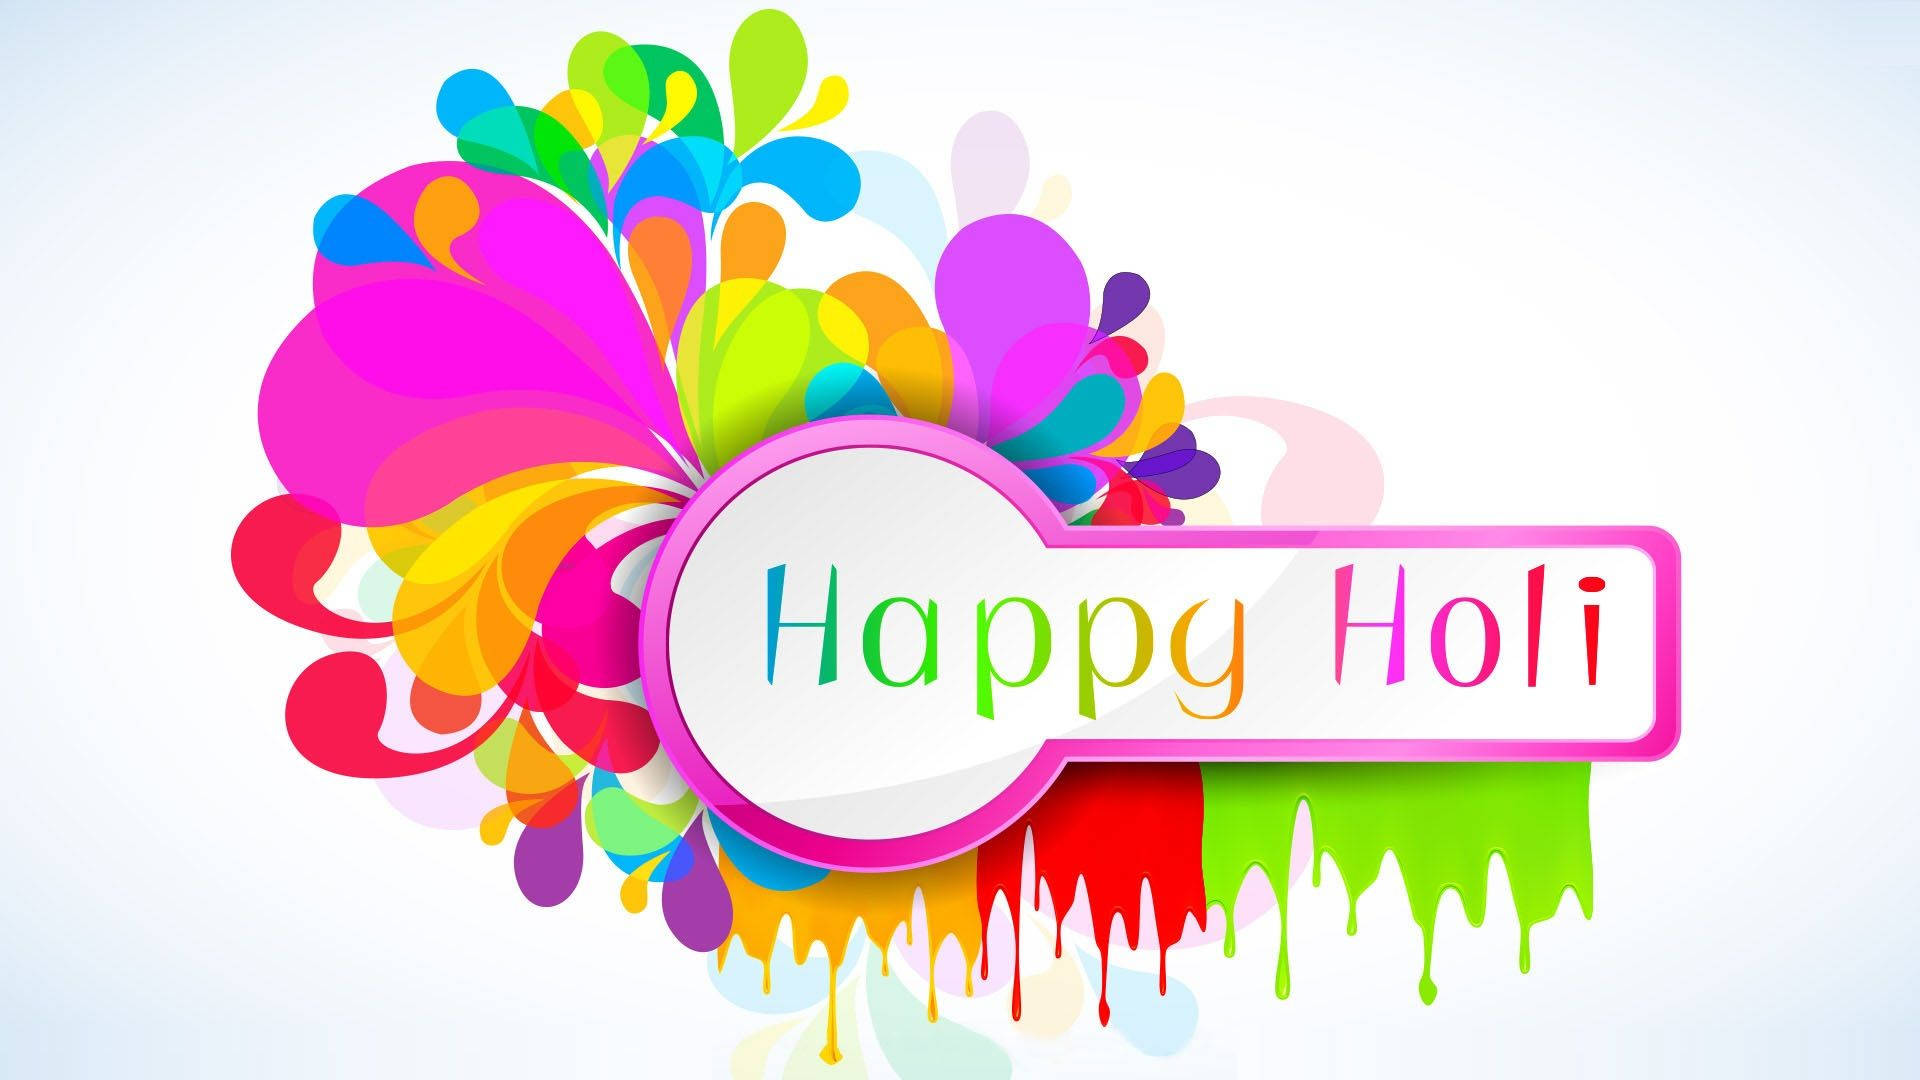 Holi 2020 New HD Wallpapers  Images  Download Free New HD Wallpapers of Happy  Holi 2020